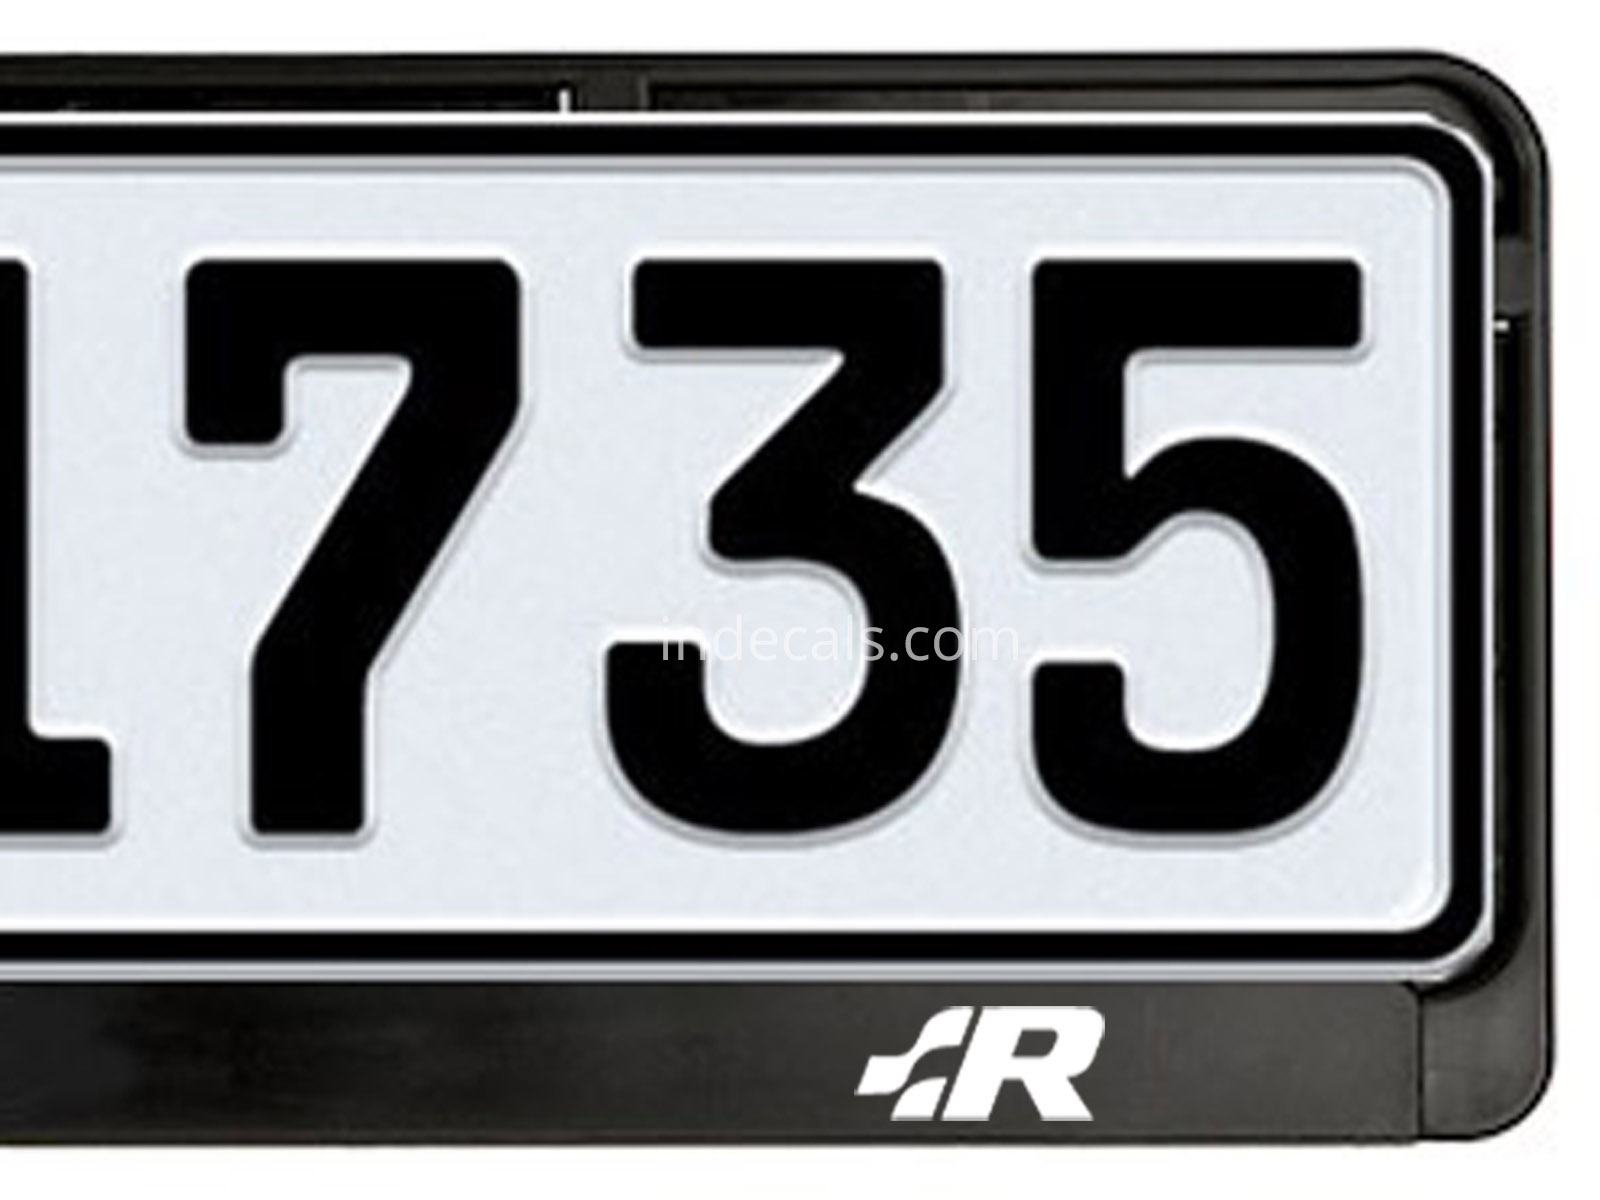 2 x Volkswagen Racing stickers for License Plate Frame